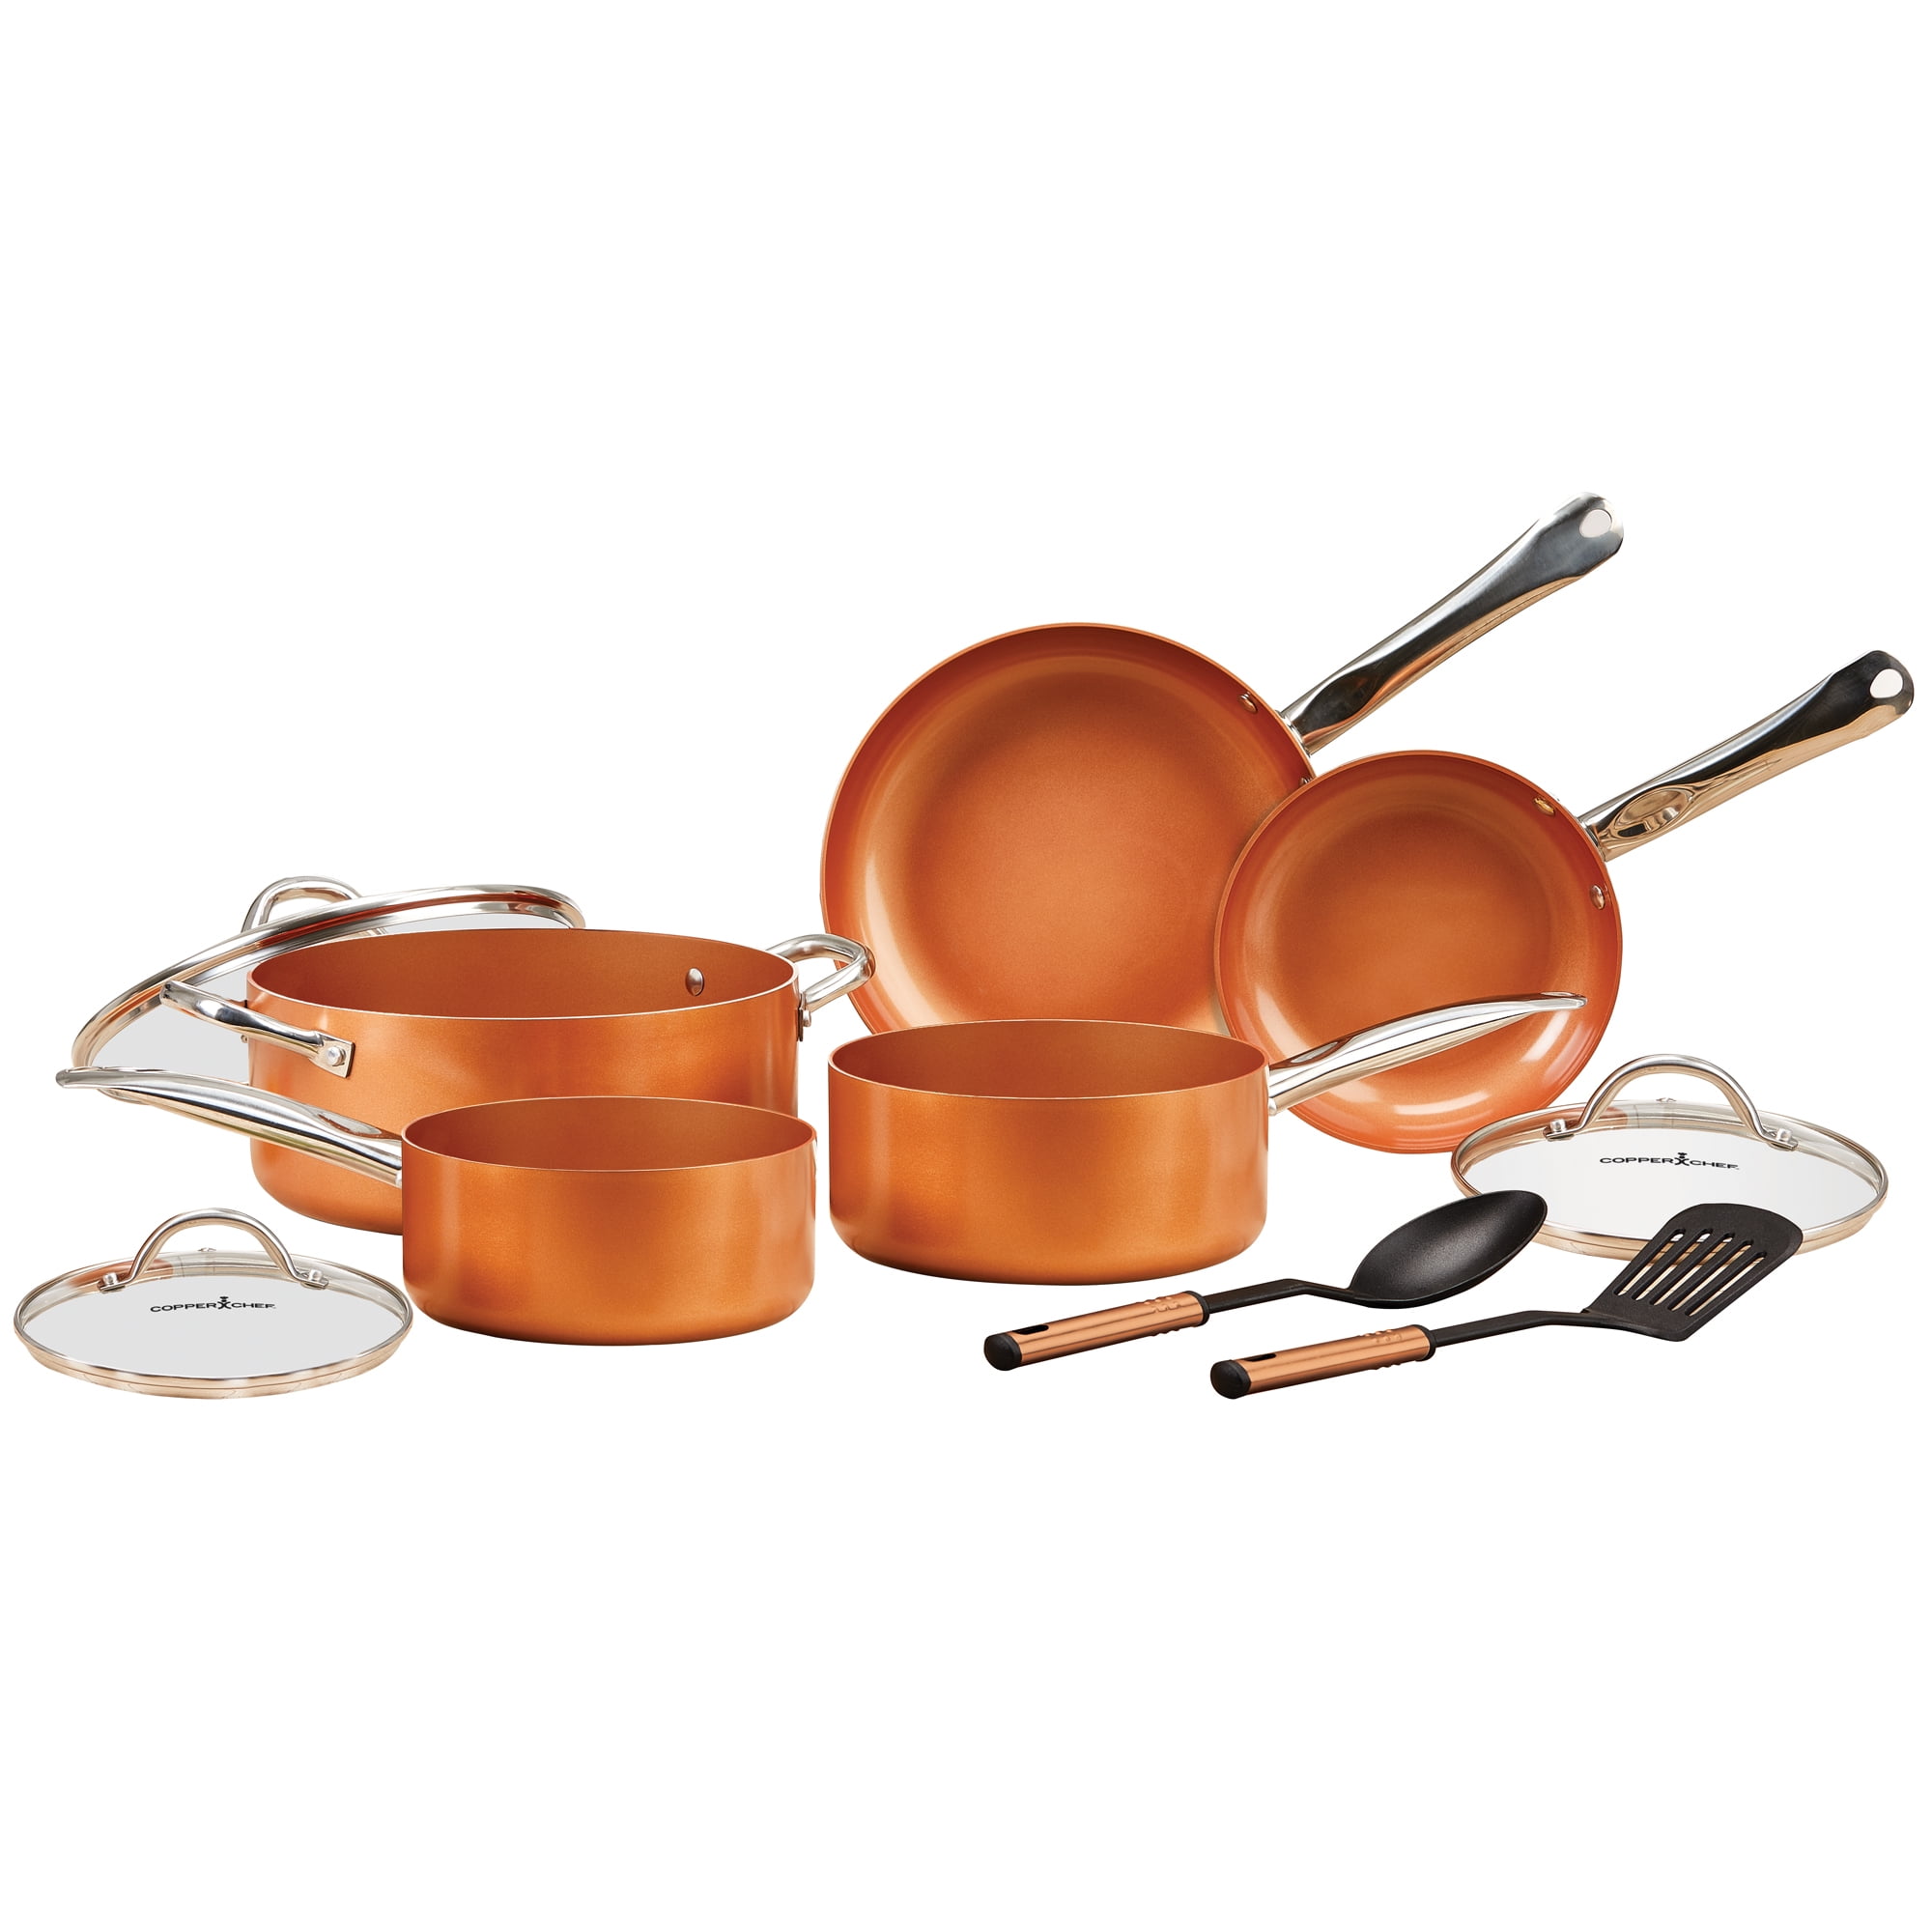 10 Pieces Copper Cookware Pans and Pots Set Omelet Pan Fry Pan Stockpot with Lid 